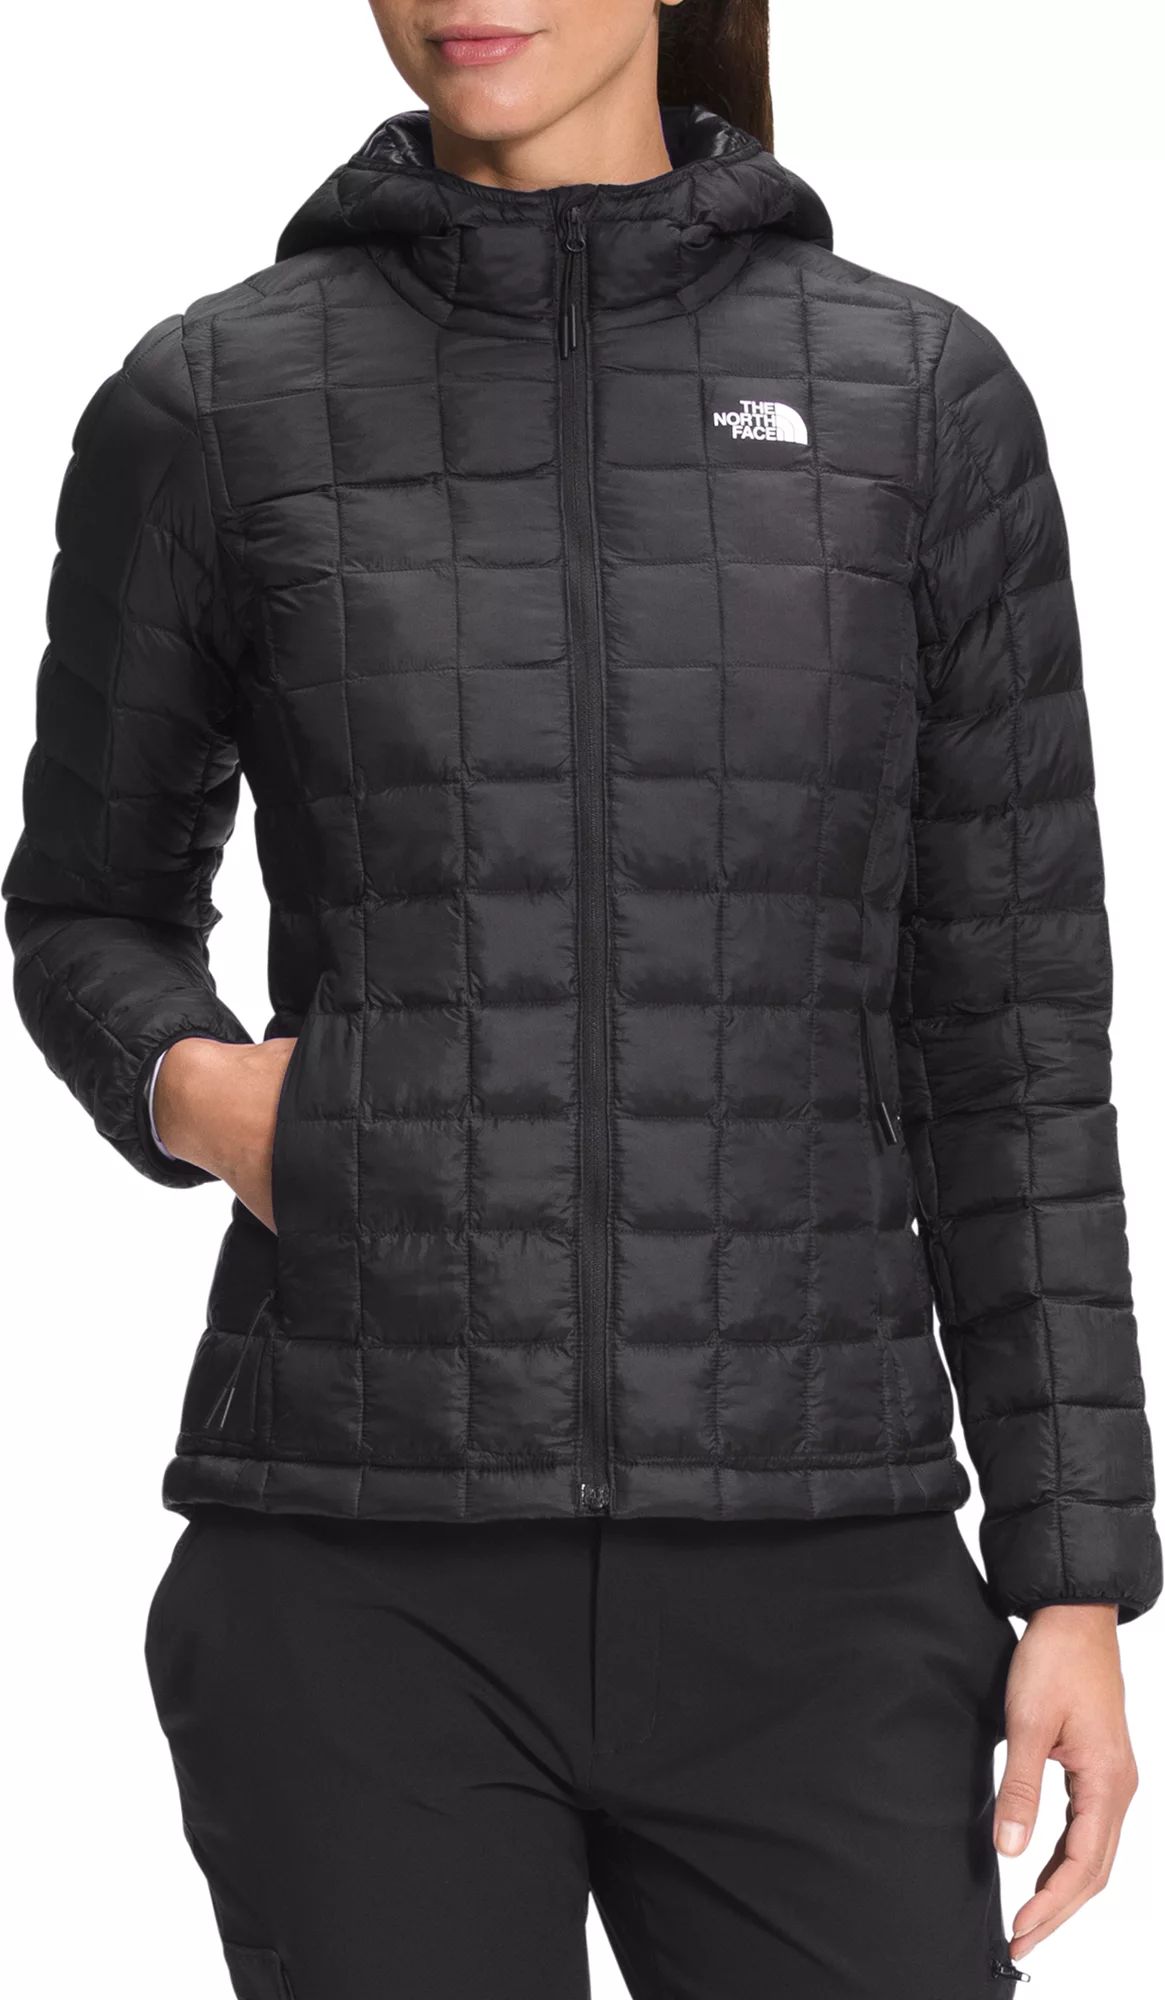 The North Face Women's ThermoBall Eco Hoodie, XL, Tnf Black | Dick's Sporting Goods